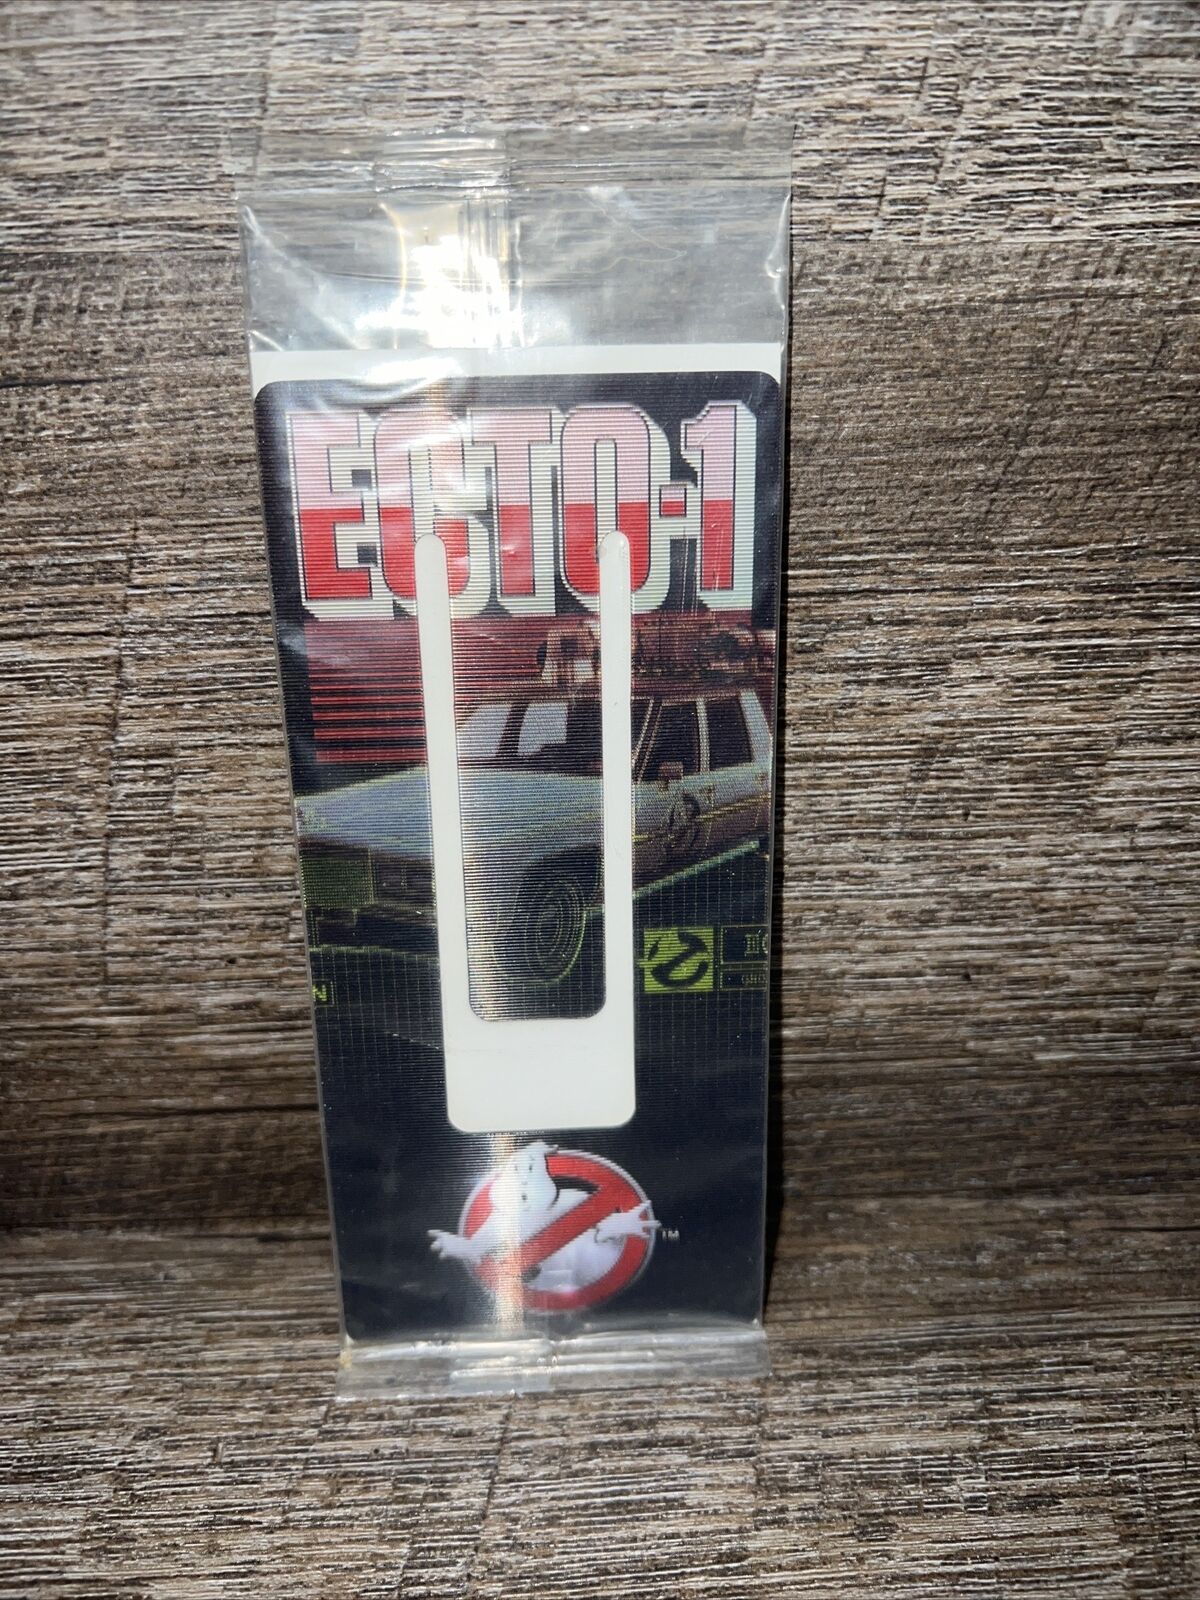 NEW Kellogg's Ghostbusters ECTO-1 Magic Motion Bookmark Sealed